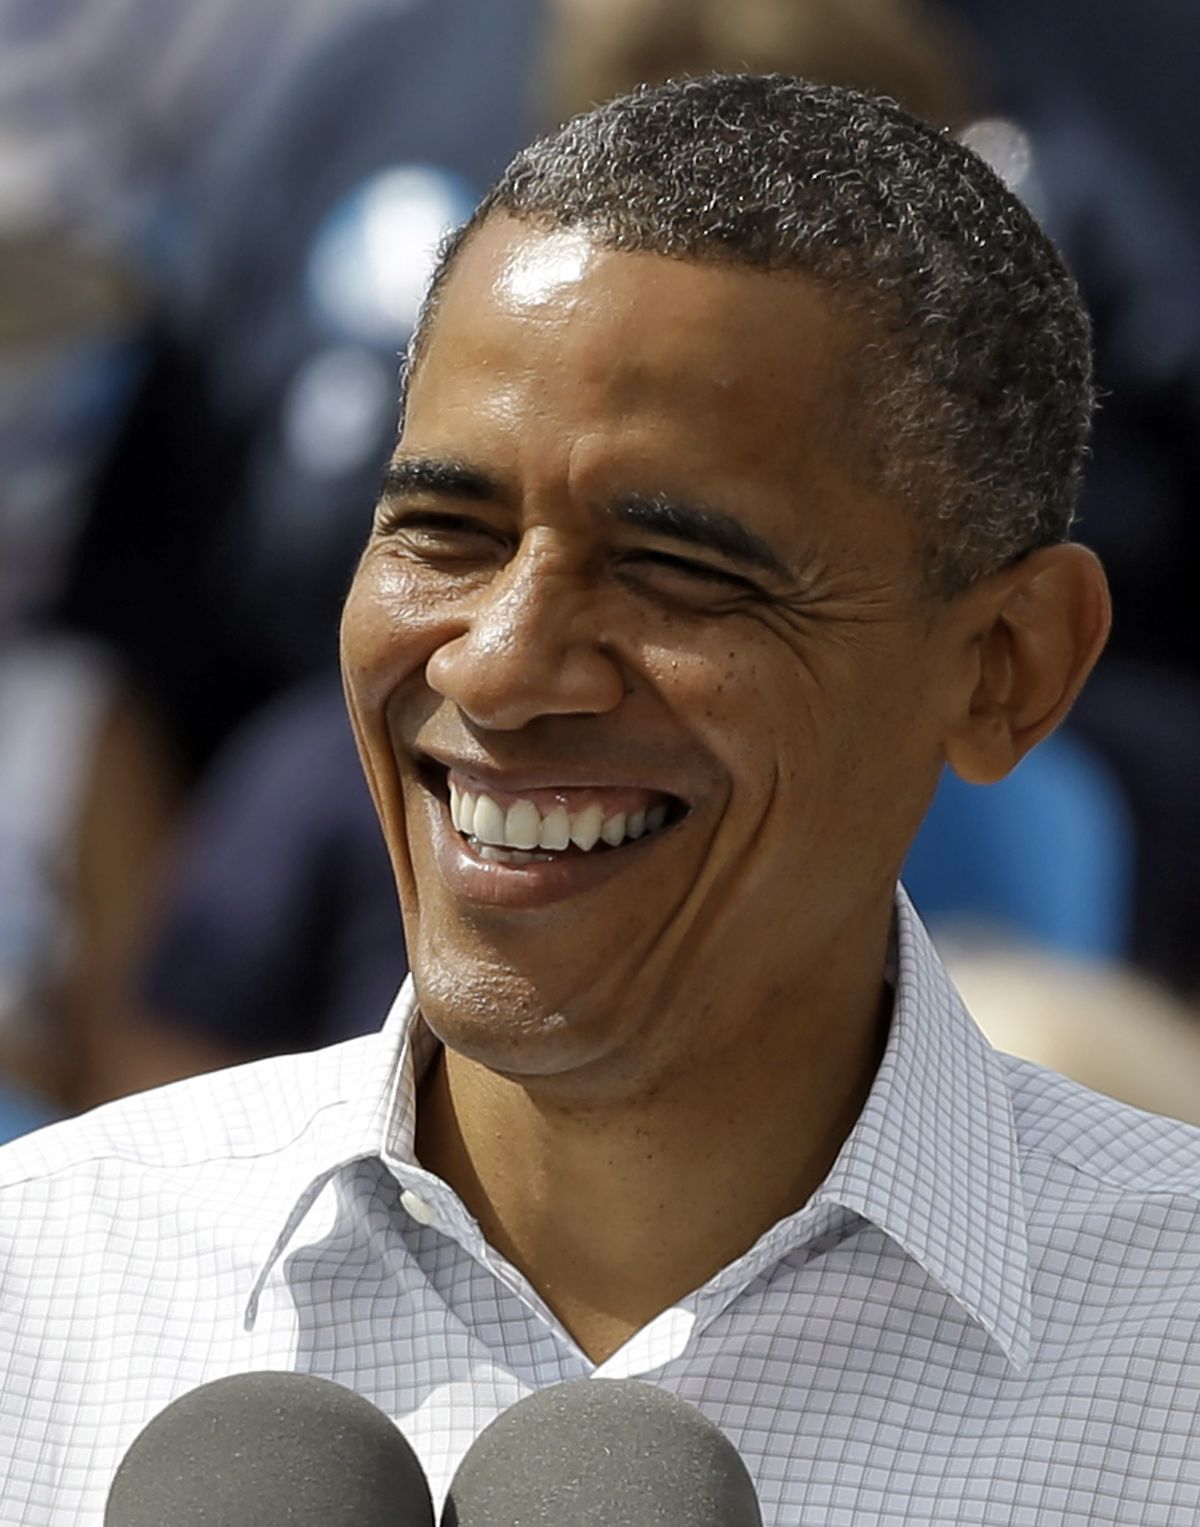 President Obama smiles at supporters during a campaign rally Saturday, Sept. 8, 2012, in Seminole, Fla. (Chris O